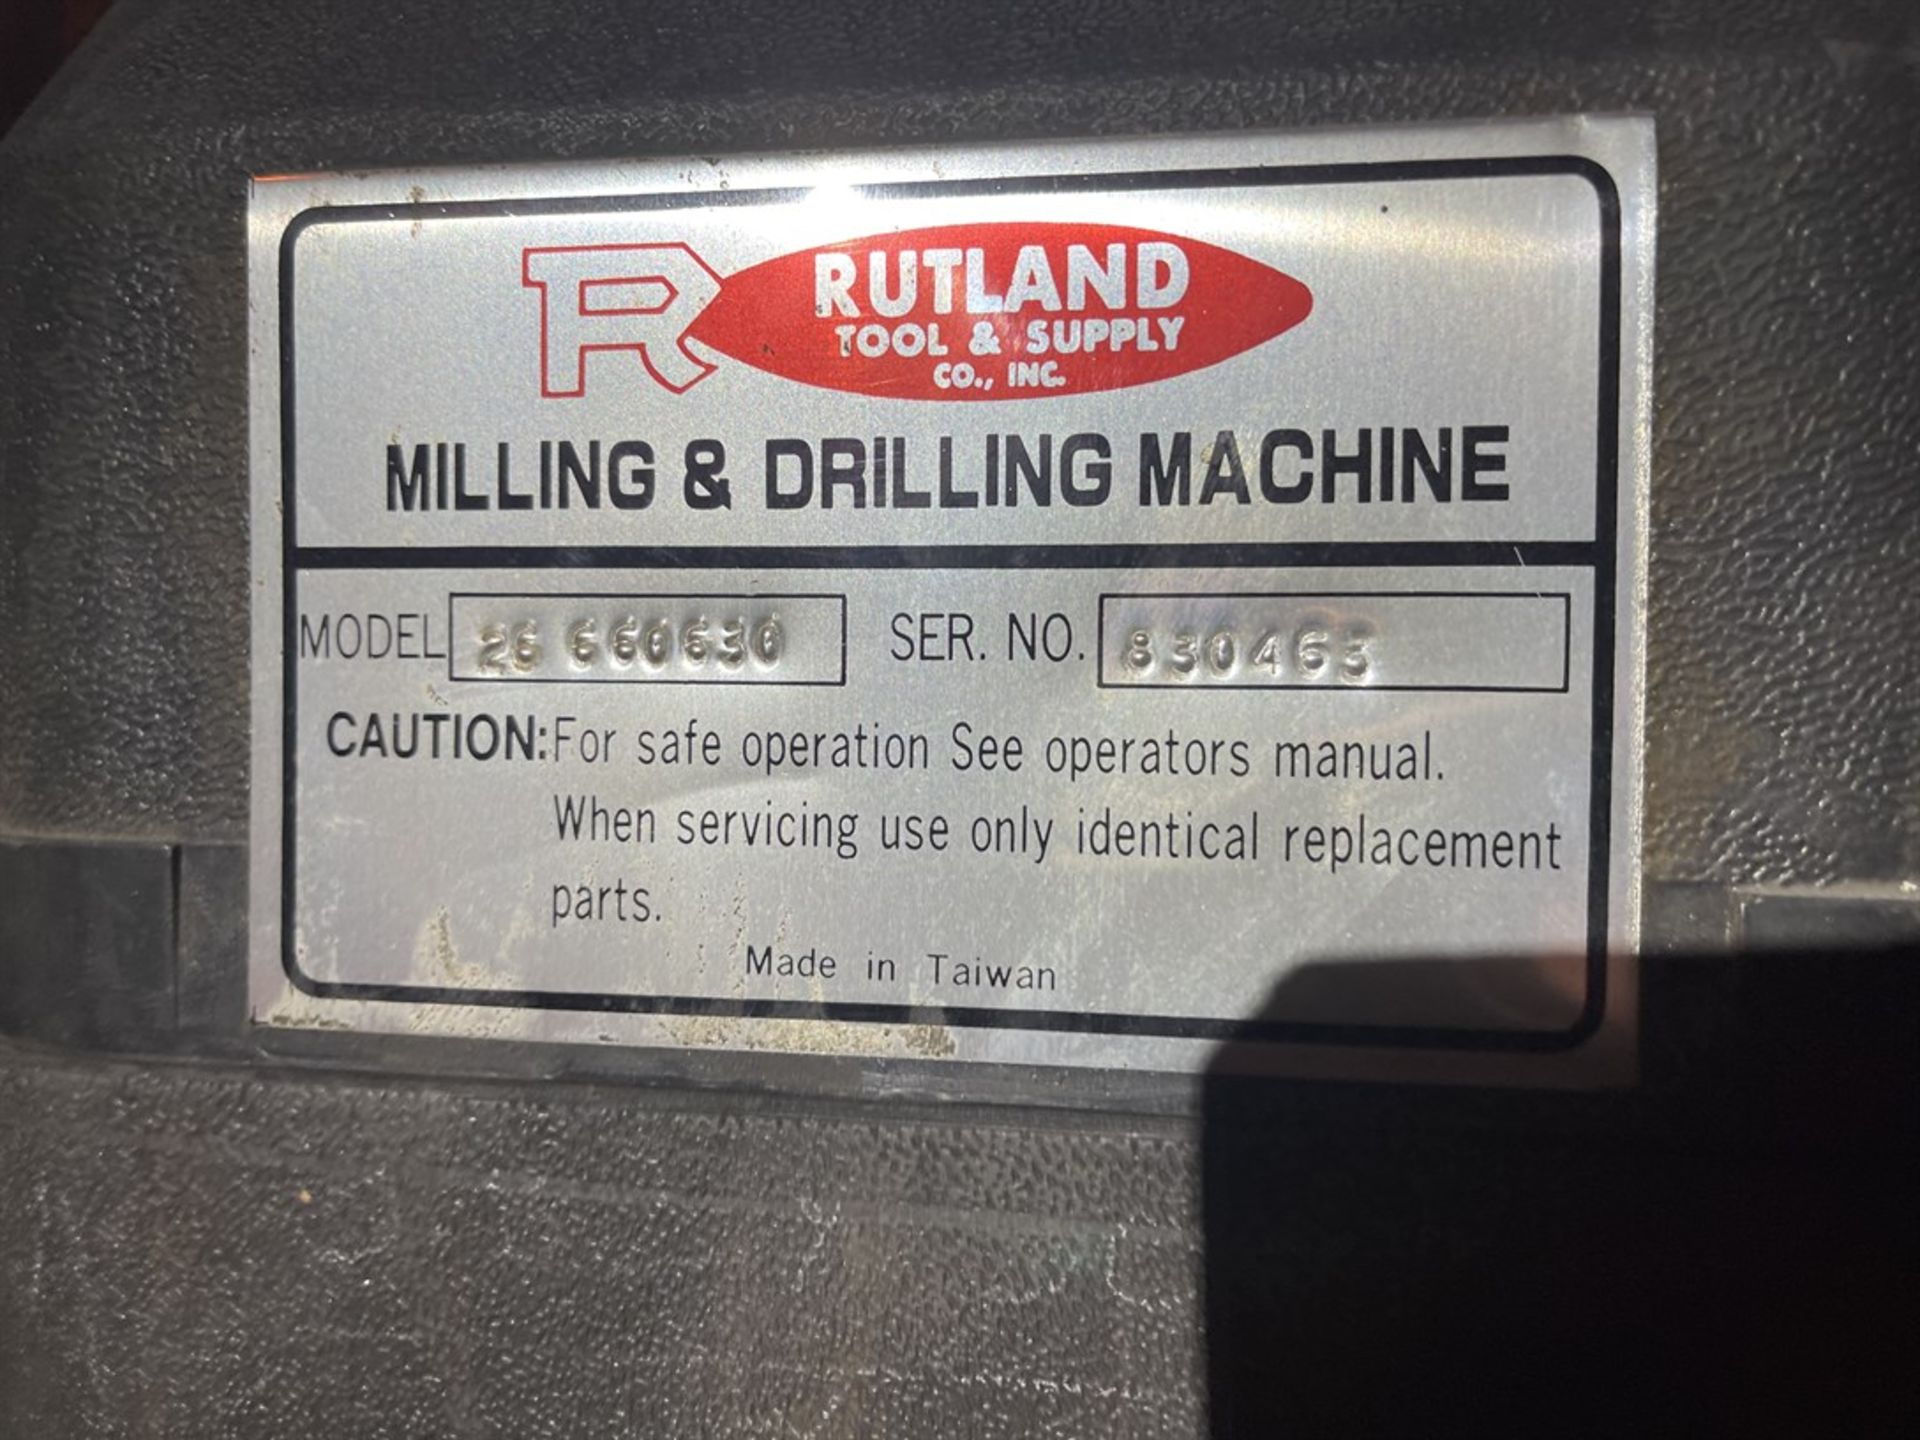 RUTLAND 26 660630 Benchtop Milling & Drilling Machine, s/n 830463, 8" x 30" Table, 2 HP - Image 4 of 5